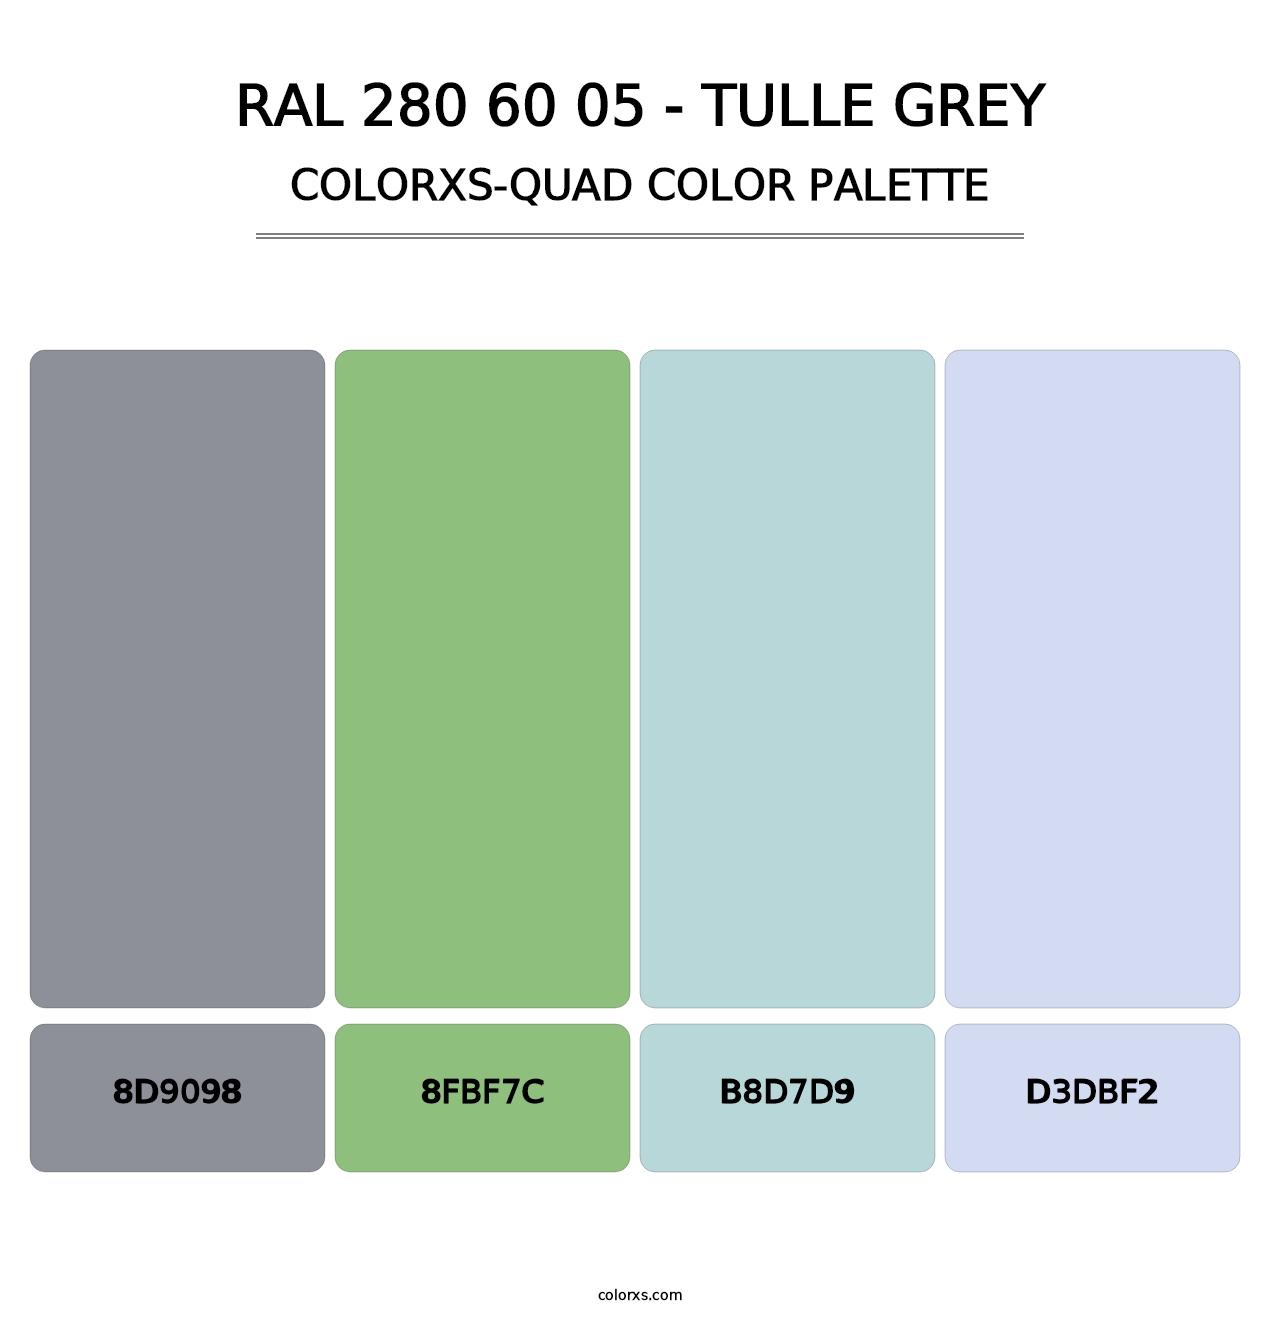 RAL 280 60 05 - Tulle Grey - Colorxs Quad Palette